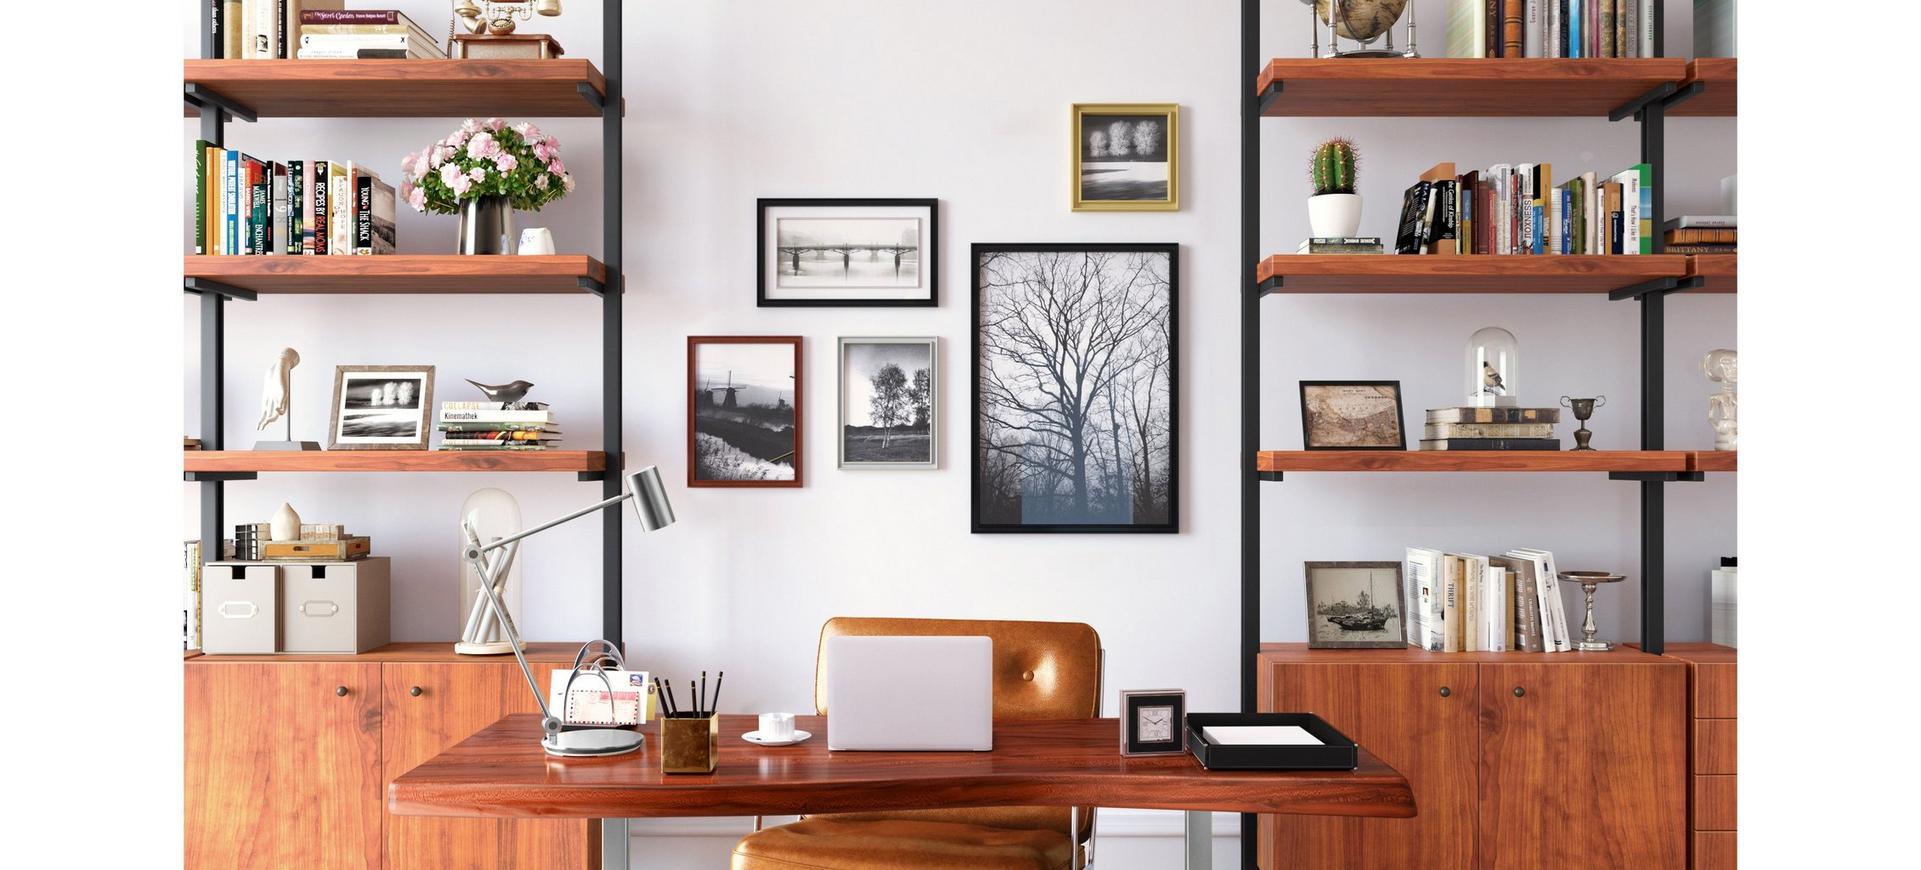 small home office design with modern decor